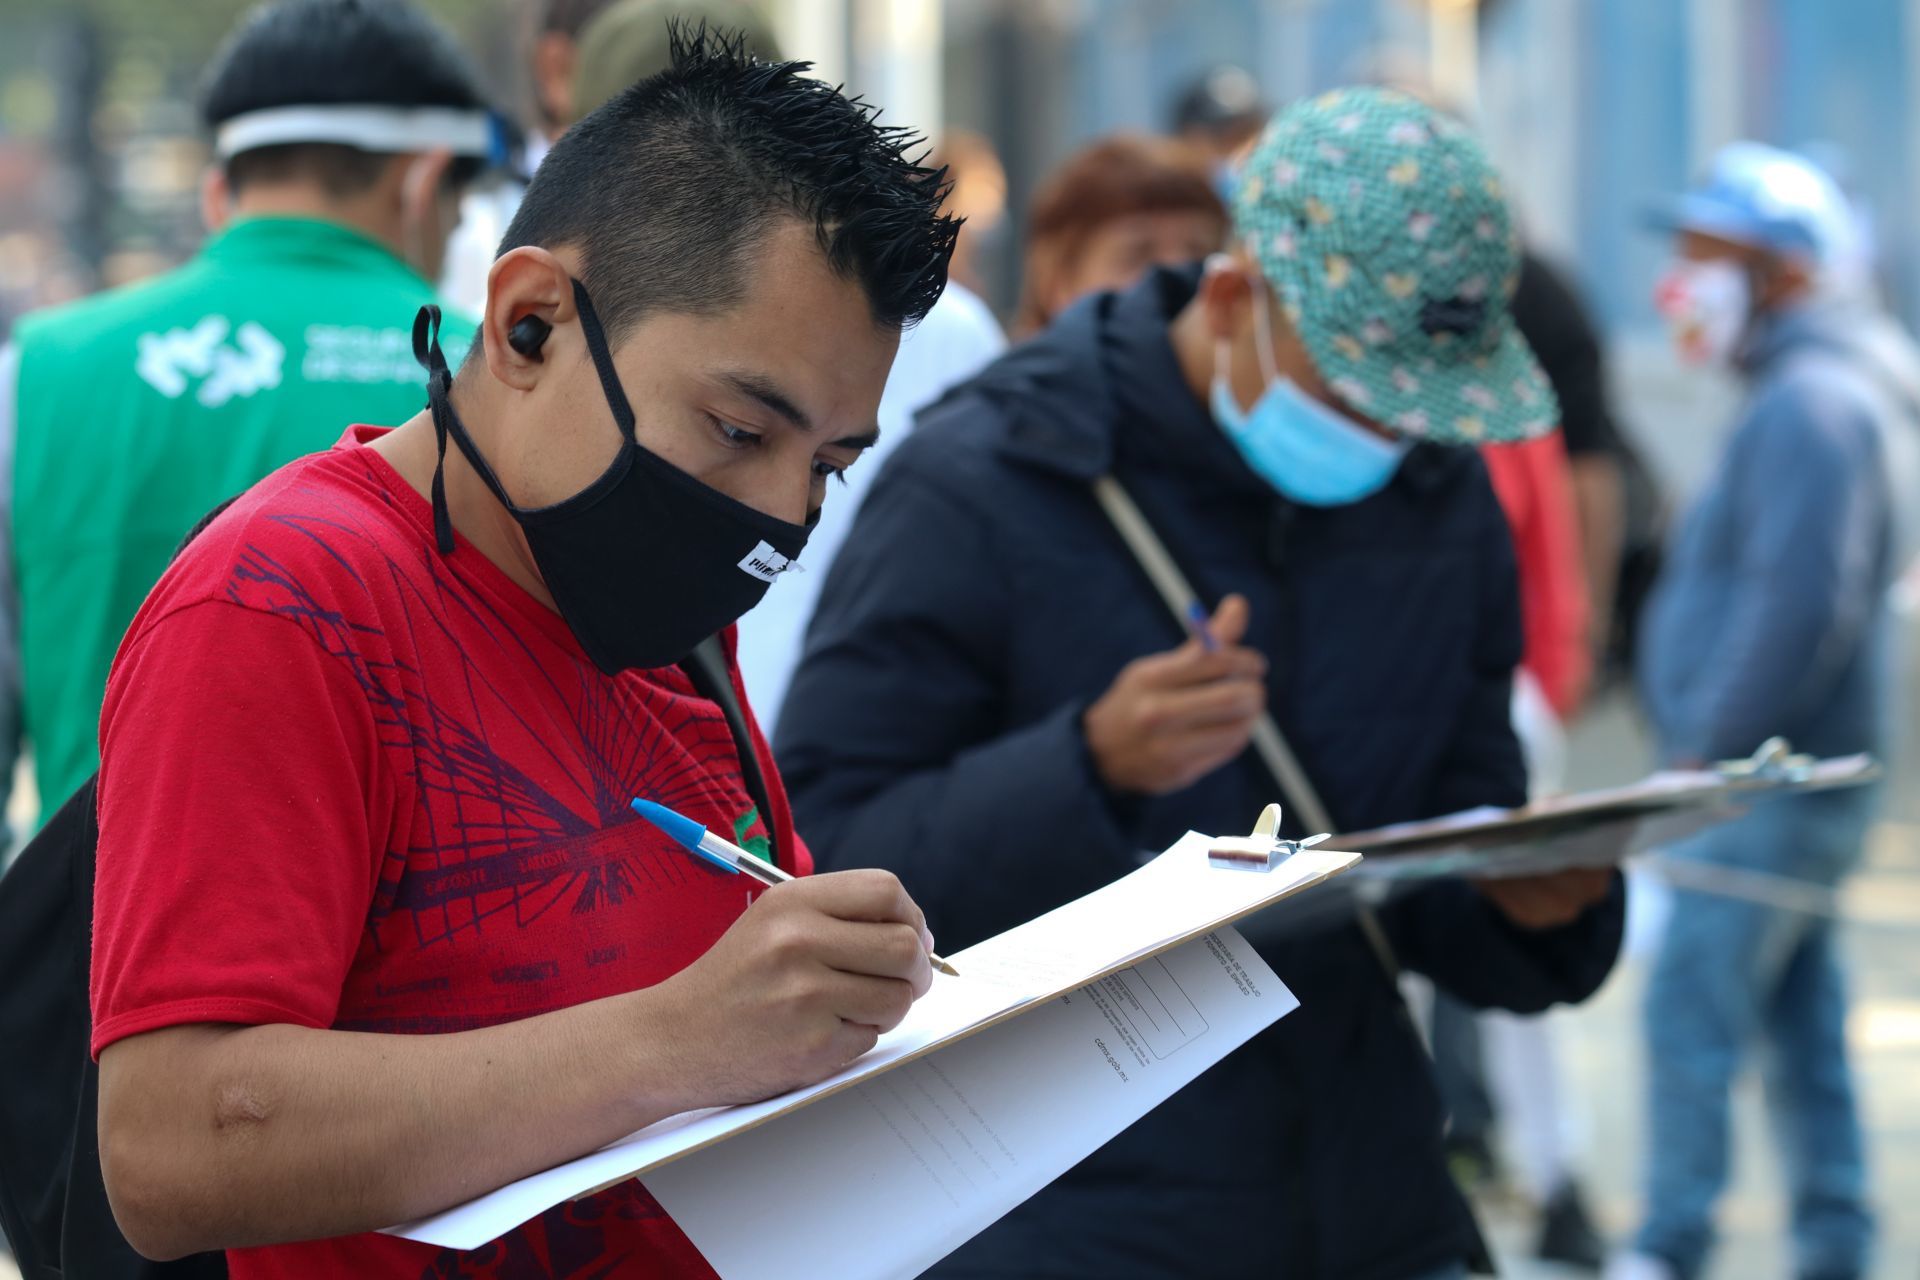 Between January and February, 163,000 IMSS-registered jobs were recovered